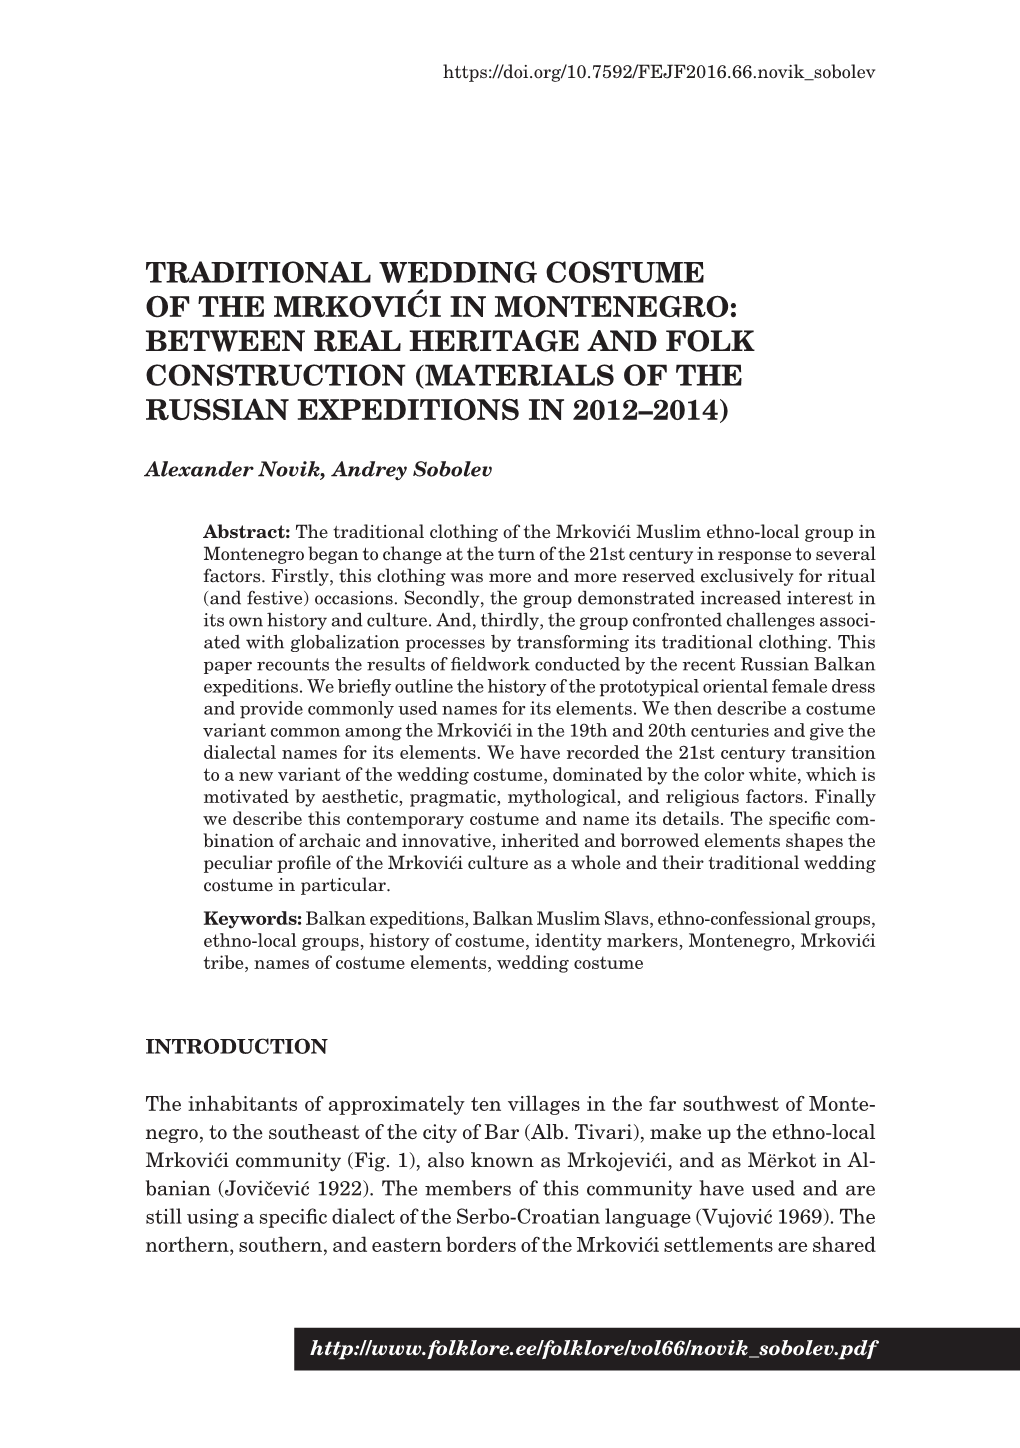 Traditional Wedding Costume of the Mrkovići in Montenegro: Between Real Heritage and Folk Construction (Materials of the Russian Expeditions in 2012–2014)